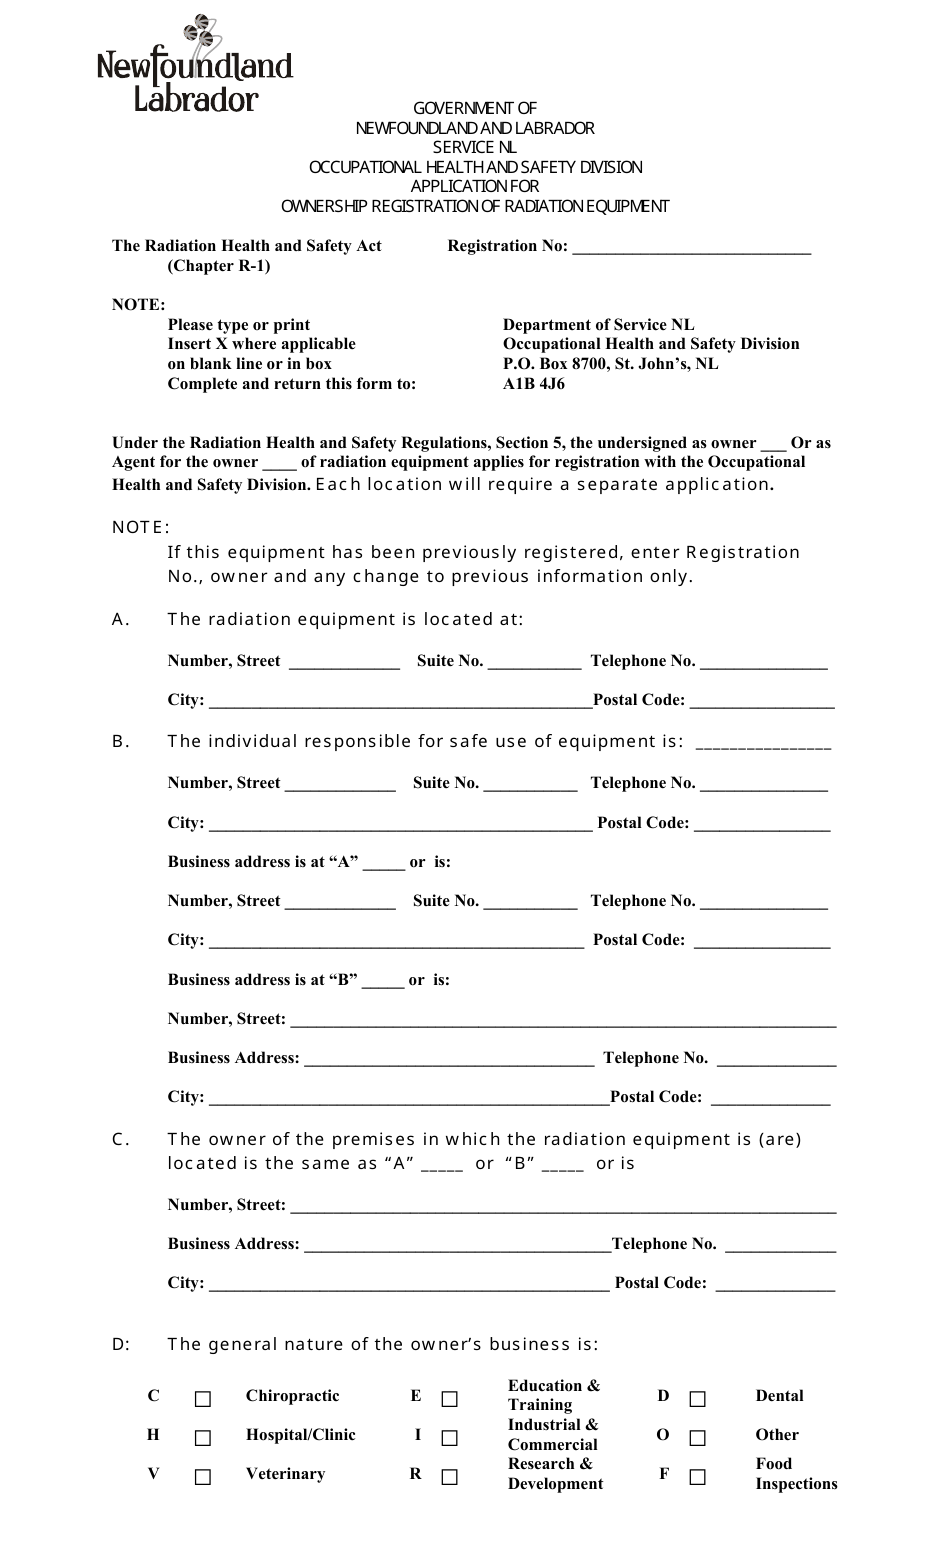 Application for Ownership Registration of Radiation Equipment - Newfoundland and Labrador, Canada, Page 1